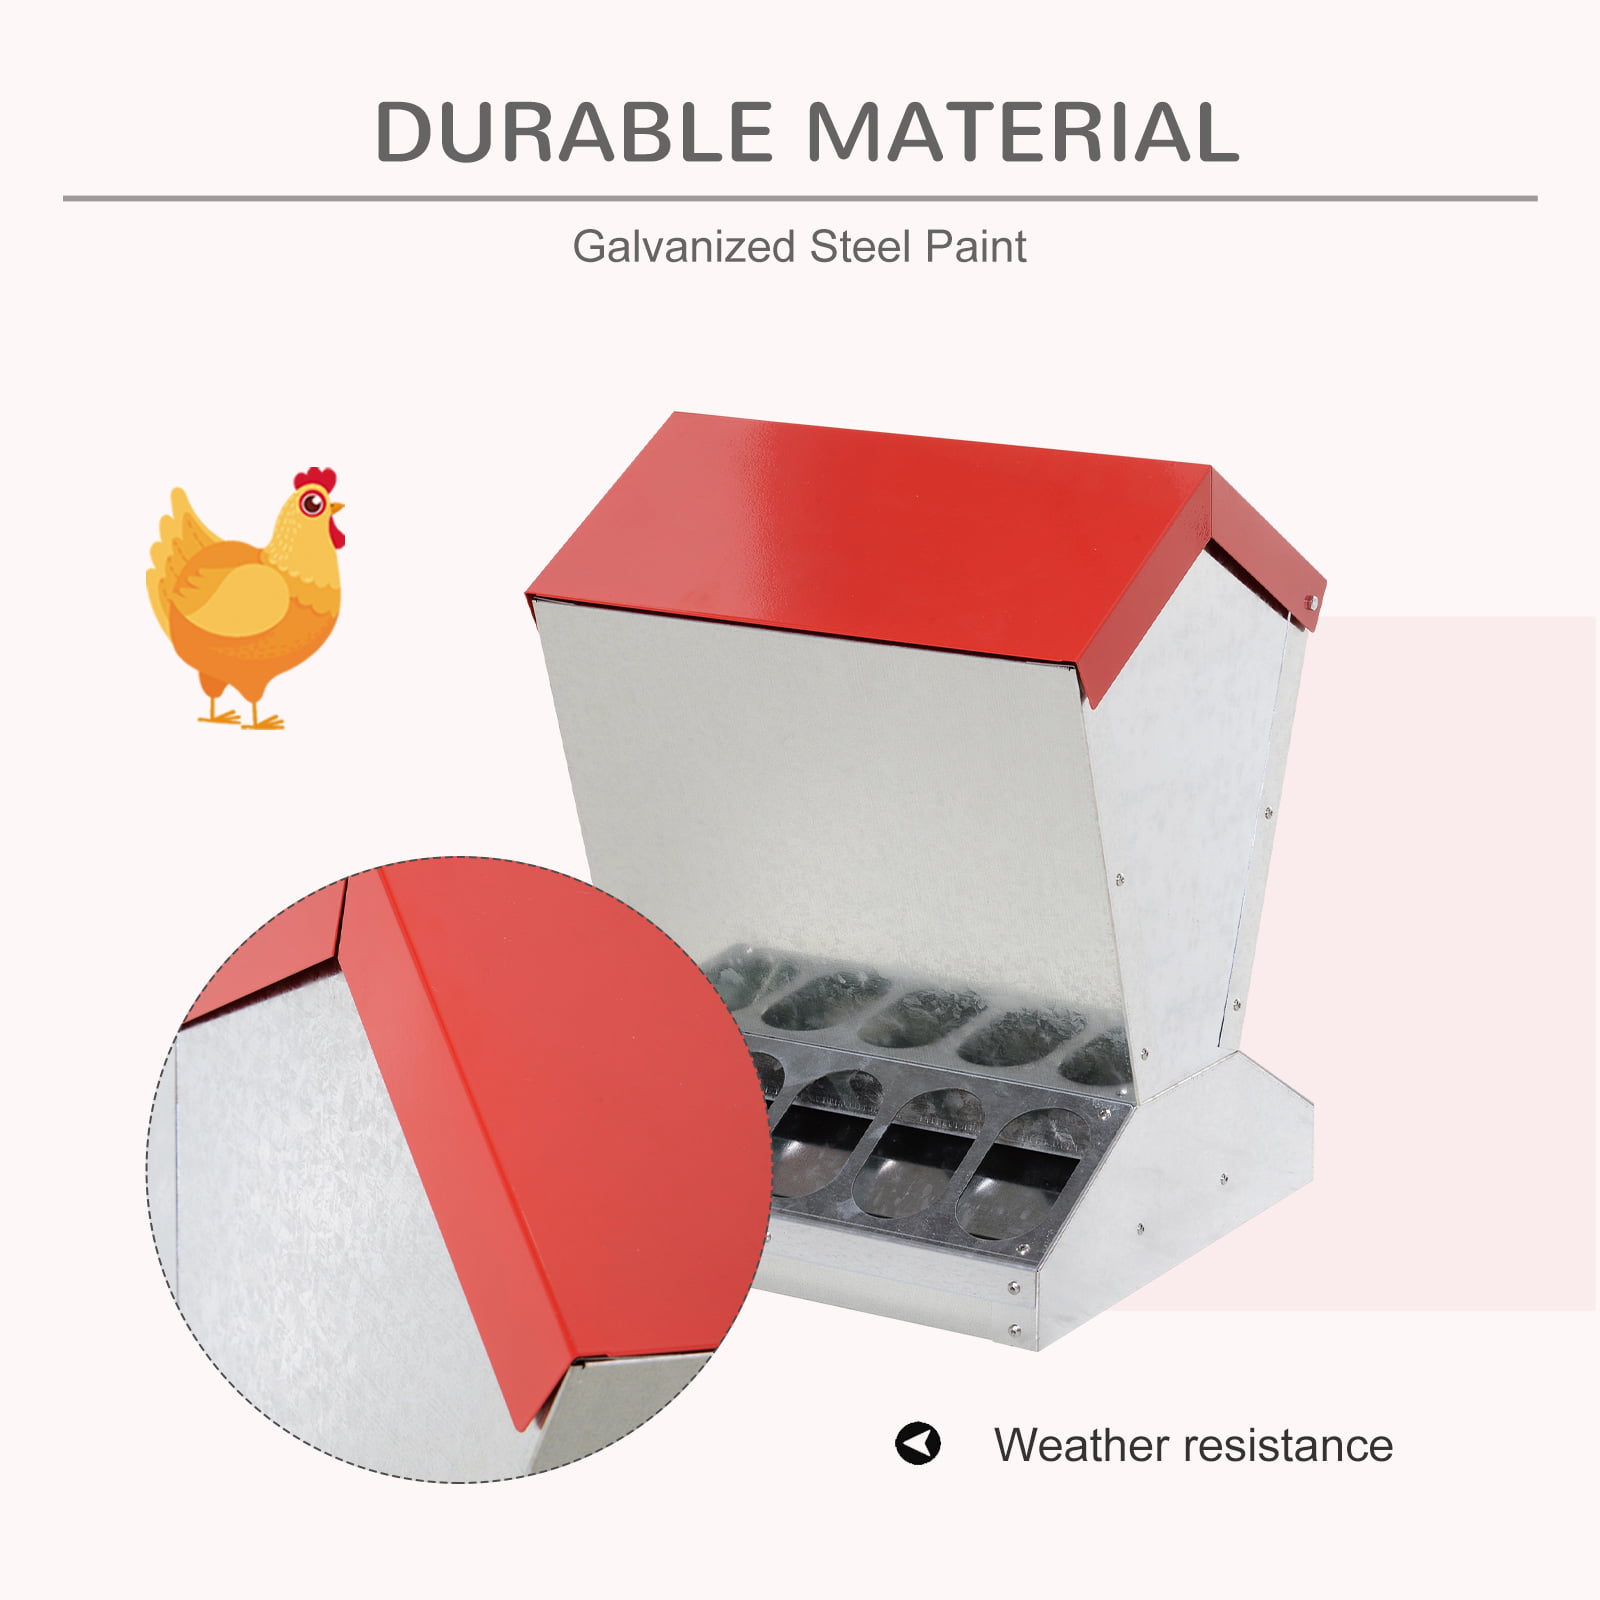 PawHut Automatic Chicken and Poultry No-Waste Feeder with Protective Lid for up to 10 Chickens Holds 25lbs of Feed